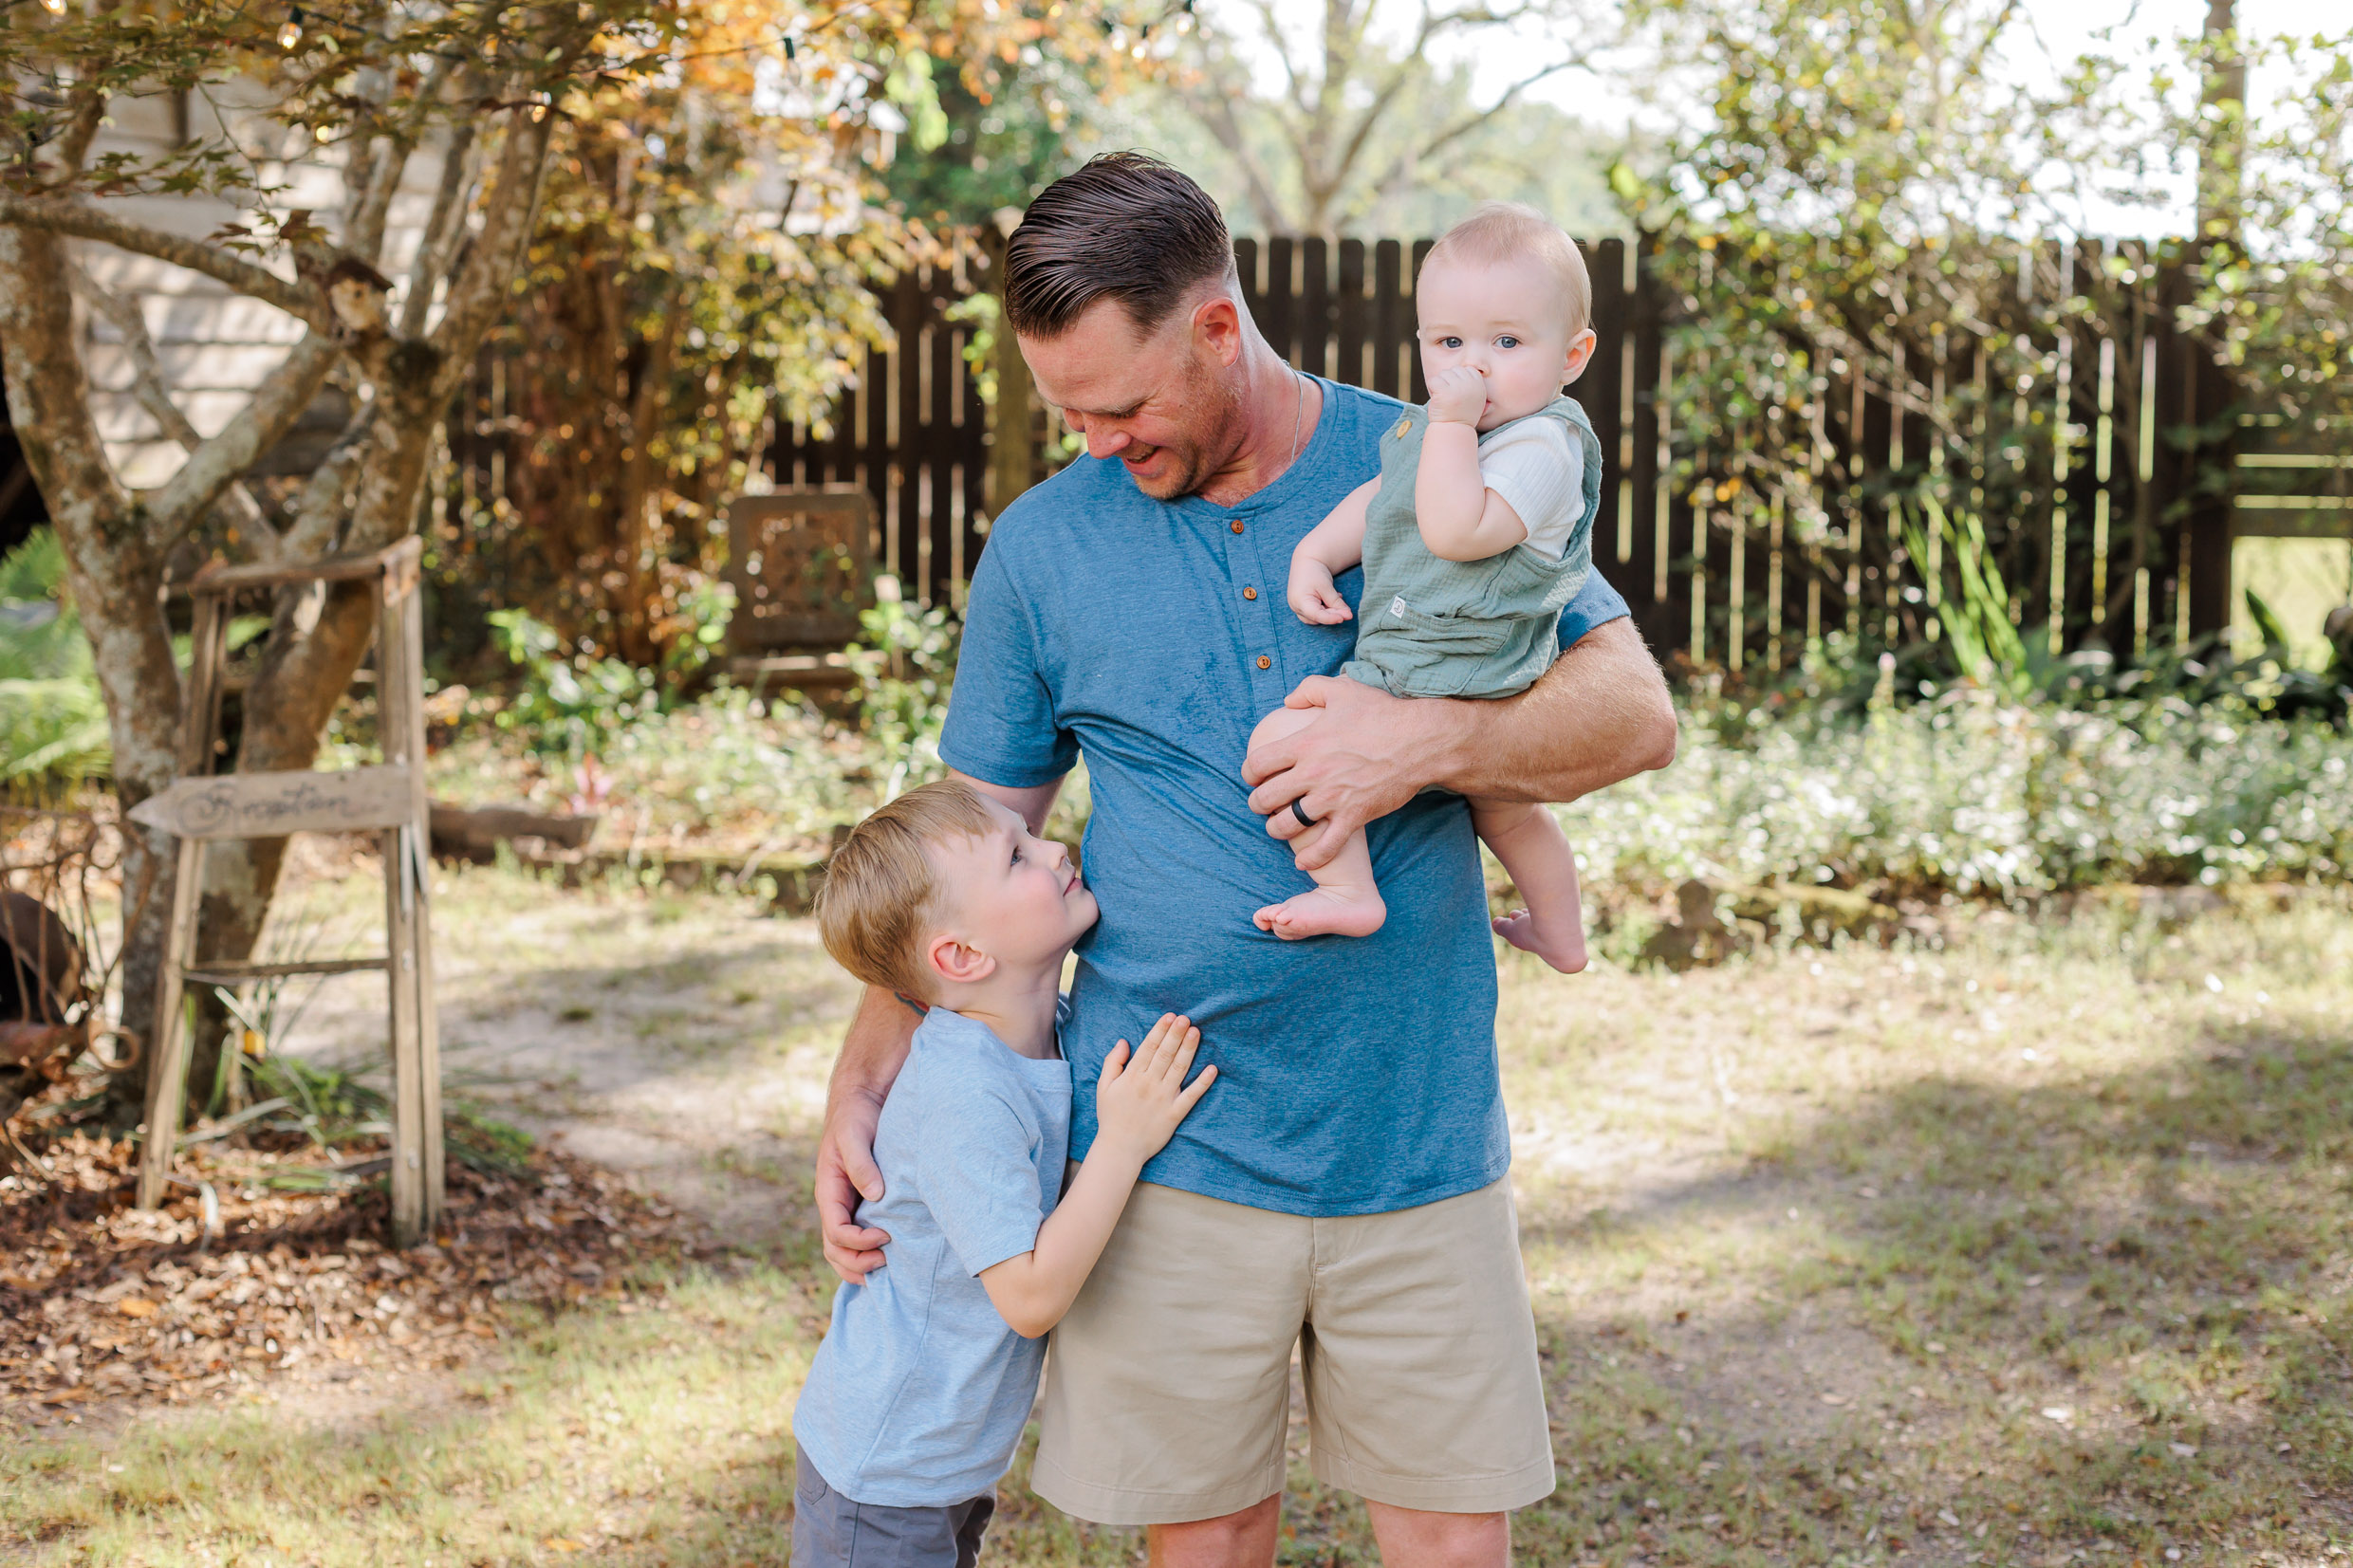 A father in a blue henley stands in a yard holding his toddler son in one arm and hugging onto his older son at his side thanks to savannah preschools